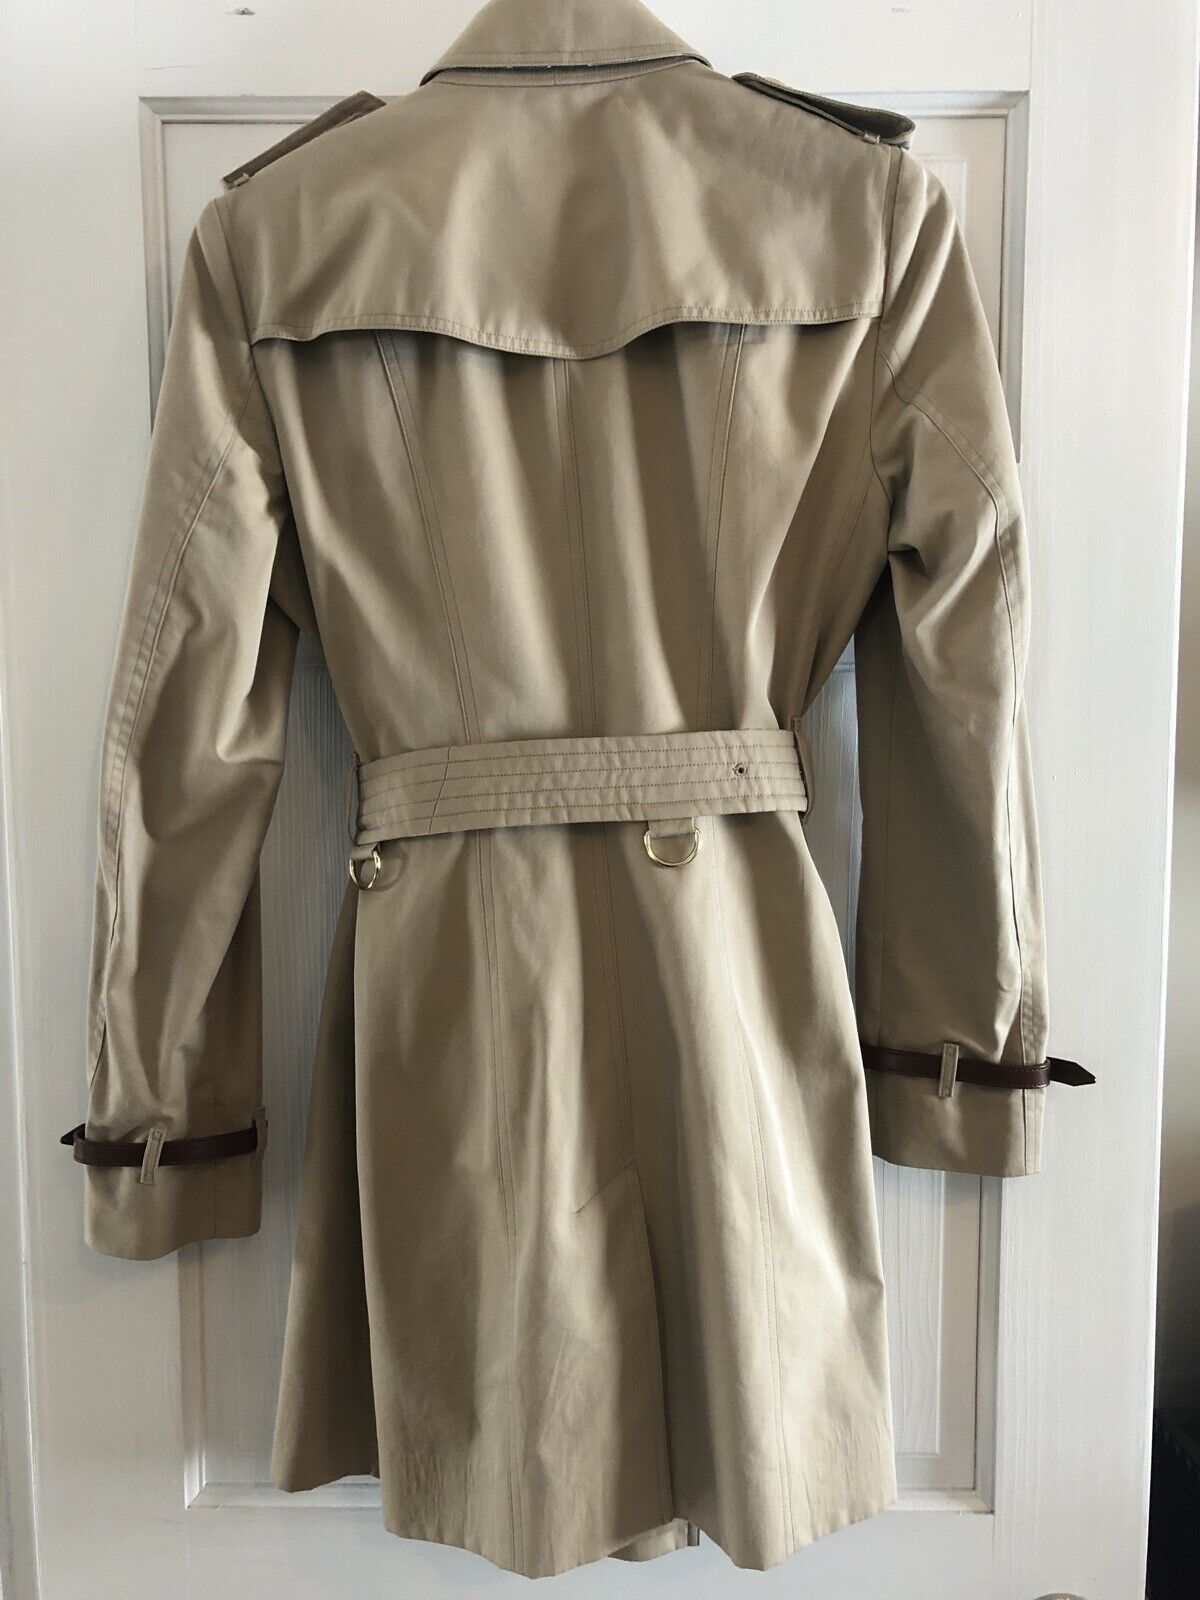 Burberry Heritage Trench Coat size US 10 leather strap gold button